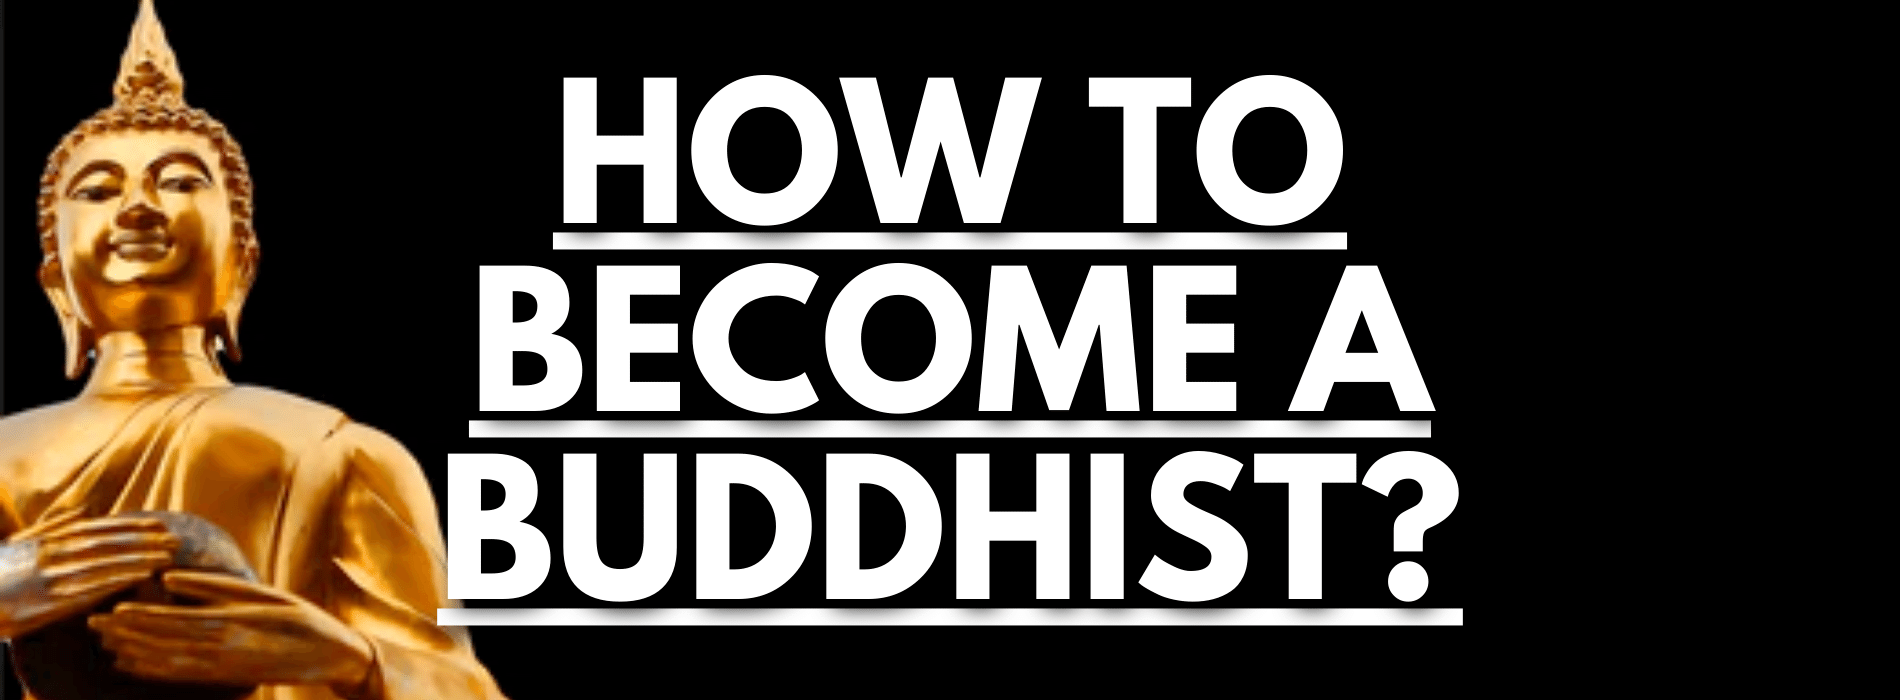 how-to-become-a-buddhist